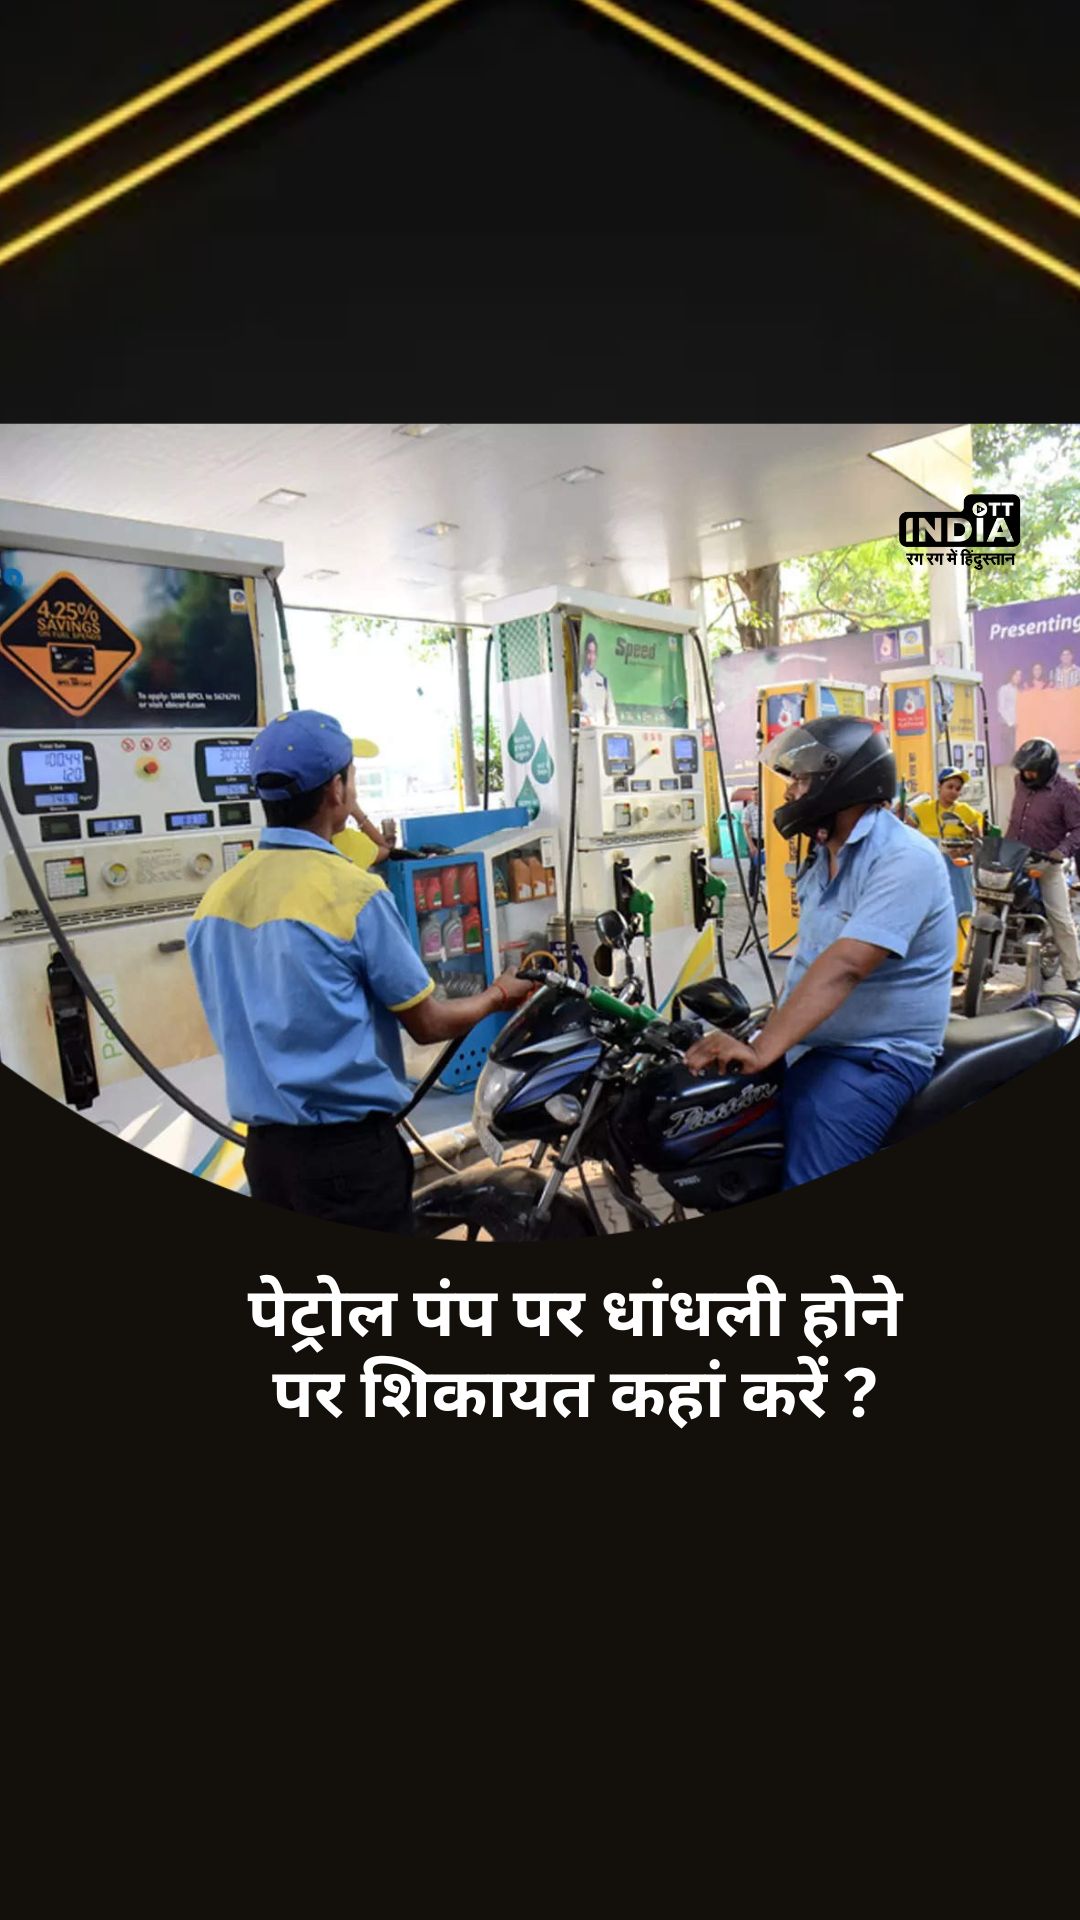 Petrol Pump Fraud Toll Free Number: Where to complain if there is fraud at petrol pump?